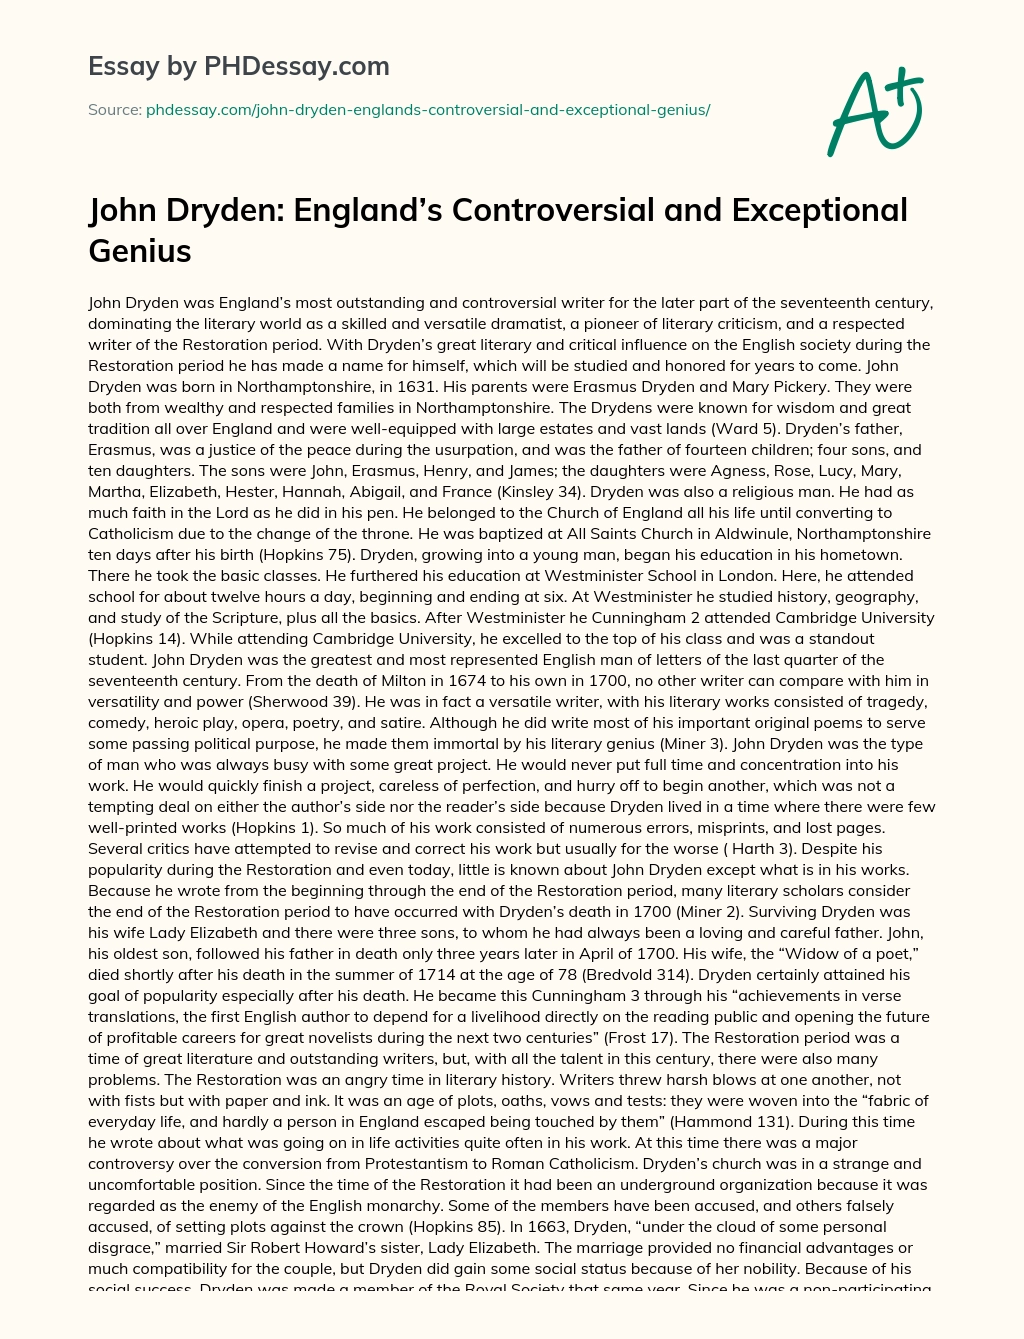 John Dryden: England’s Controversial and Exceptional Genius essay